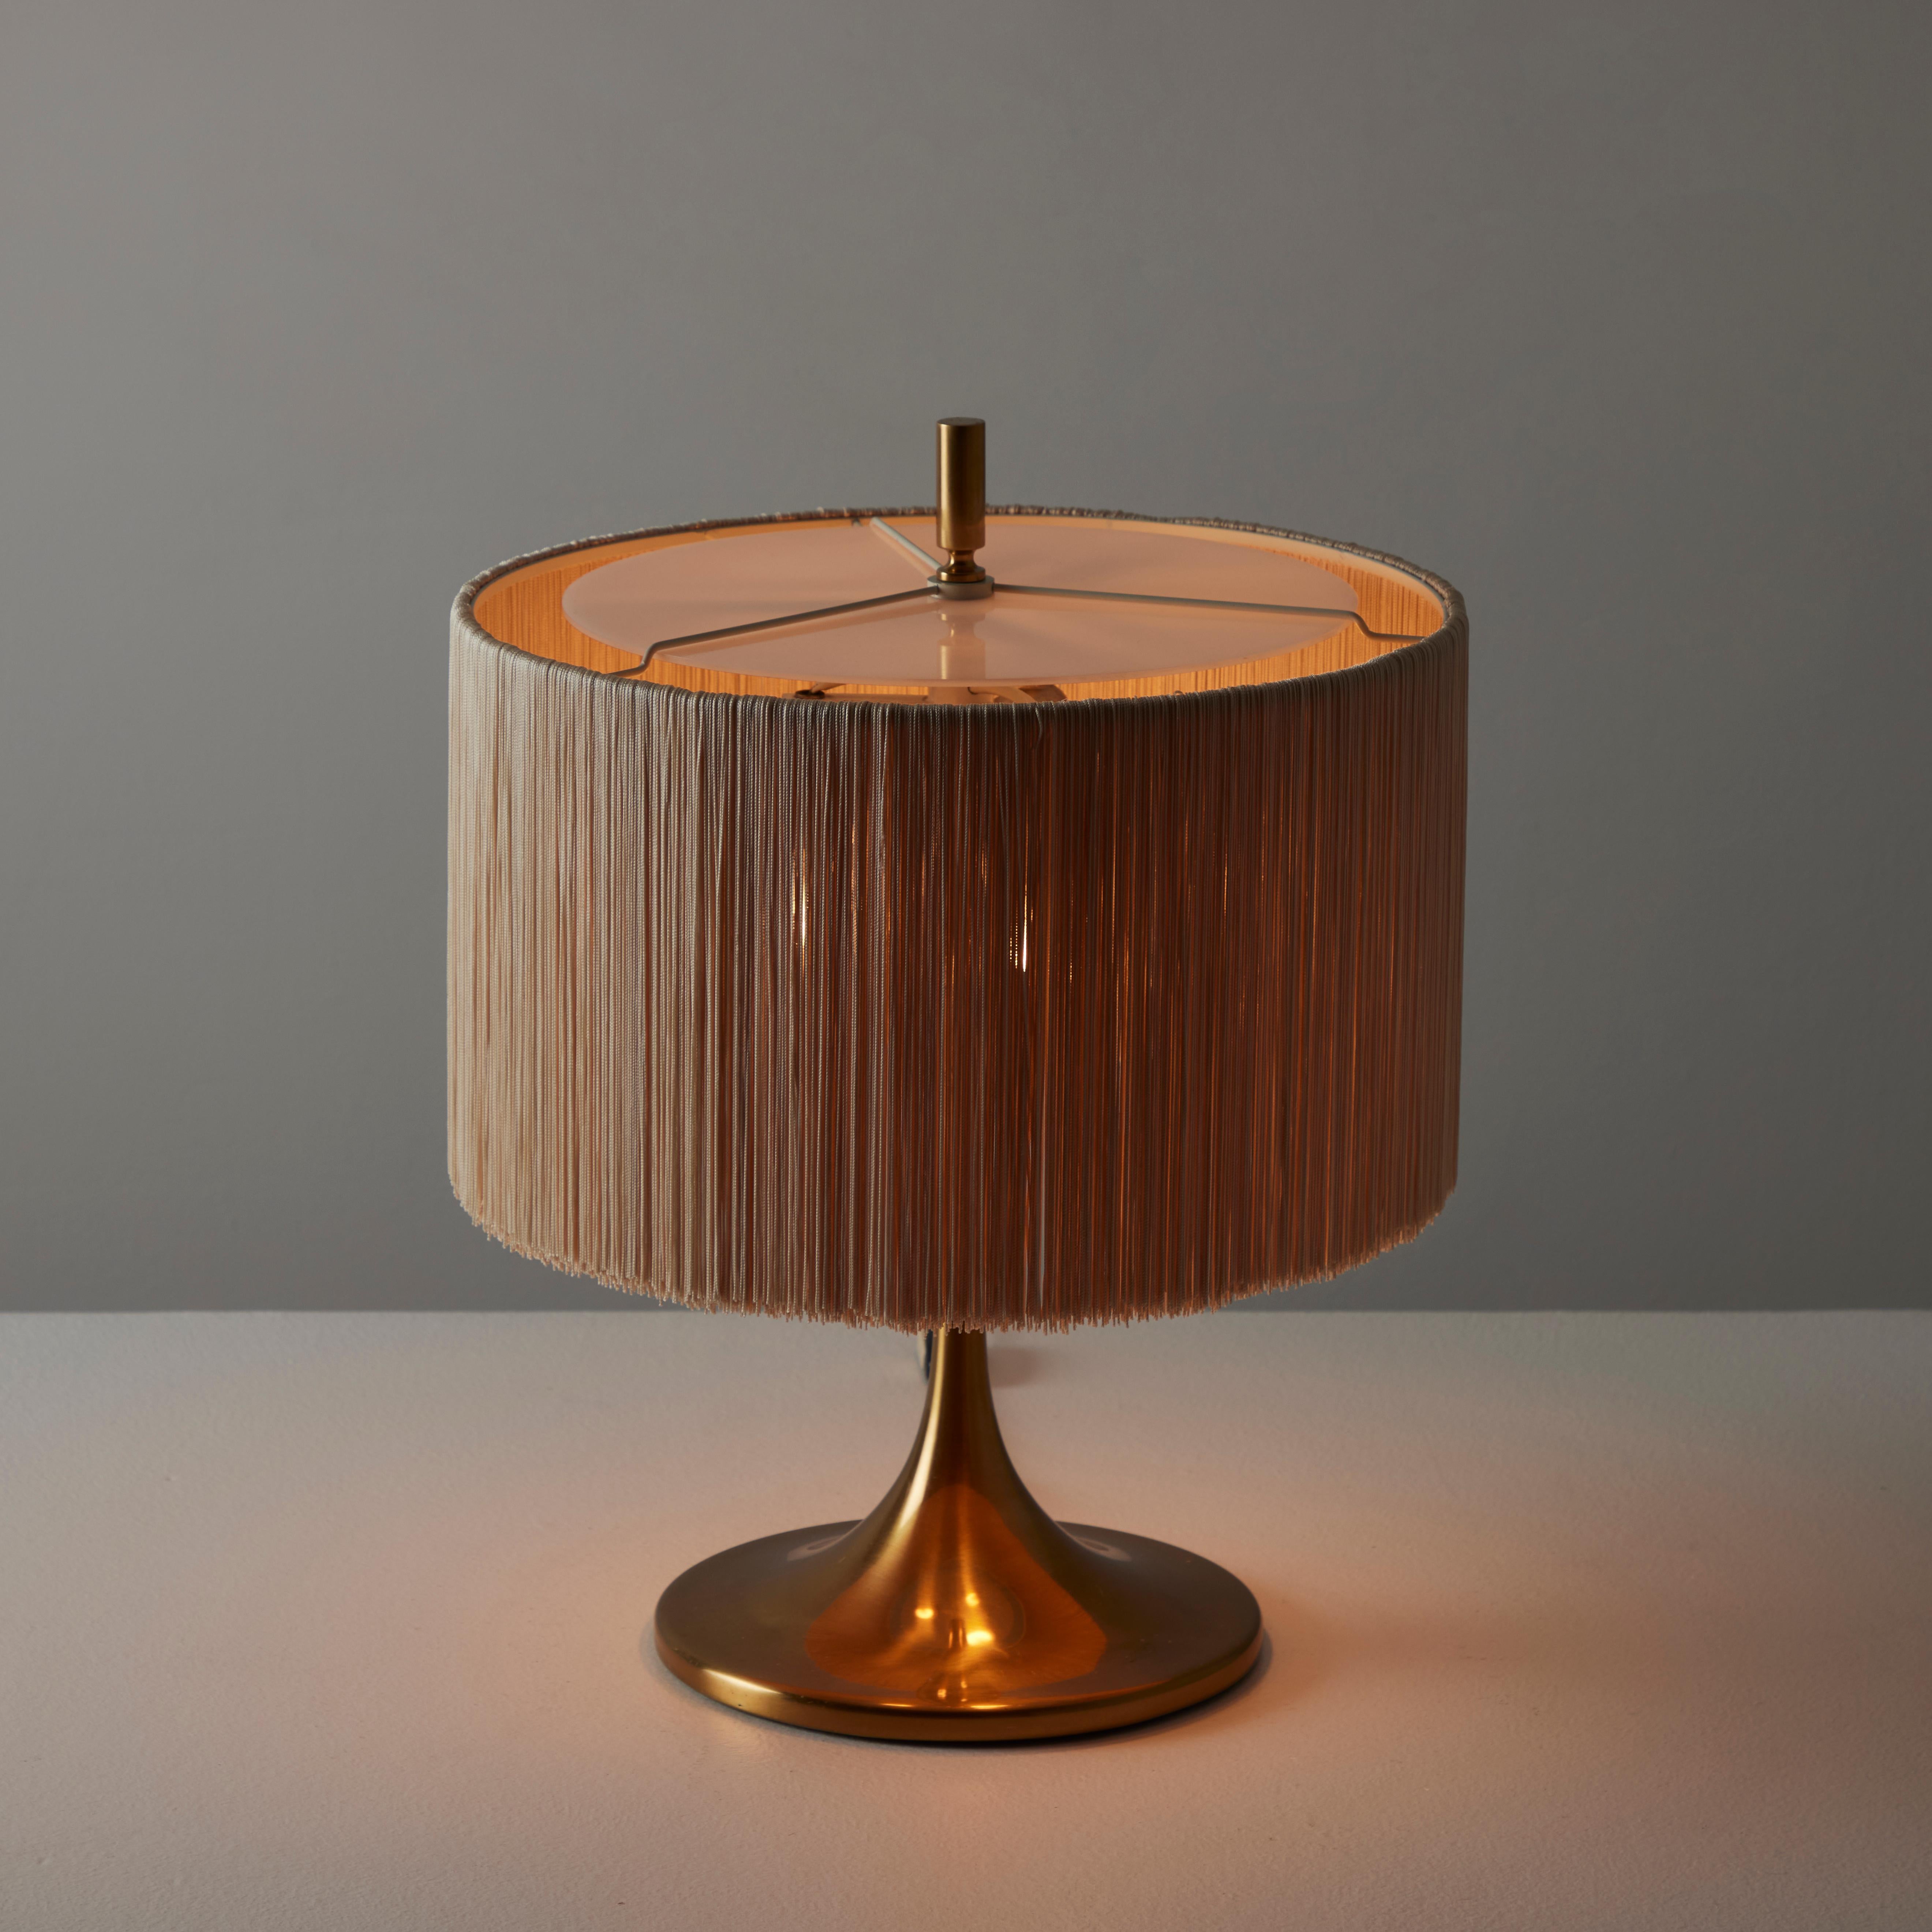 Model 282 Table Lamp by Paolo Caliari for Oluce. Designed and manufactured in Italy, circa the 1960s. Tulip polished brass base, paired with a fringe shade. The shade is a cream colored fringe cylinder with an acrylic op diffuser. The light holds a